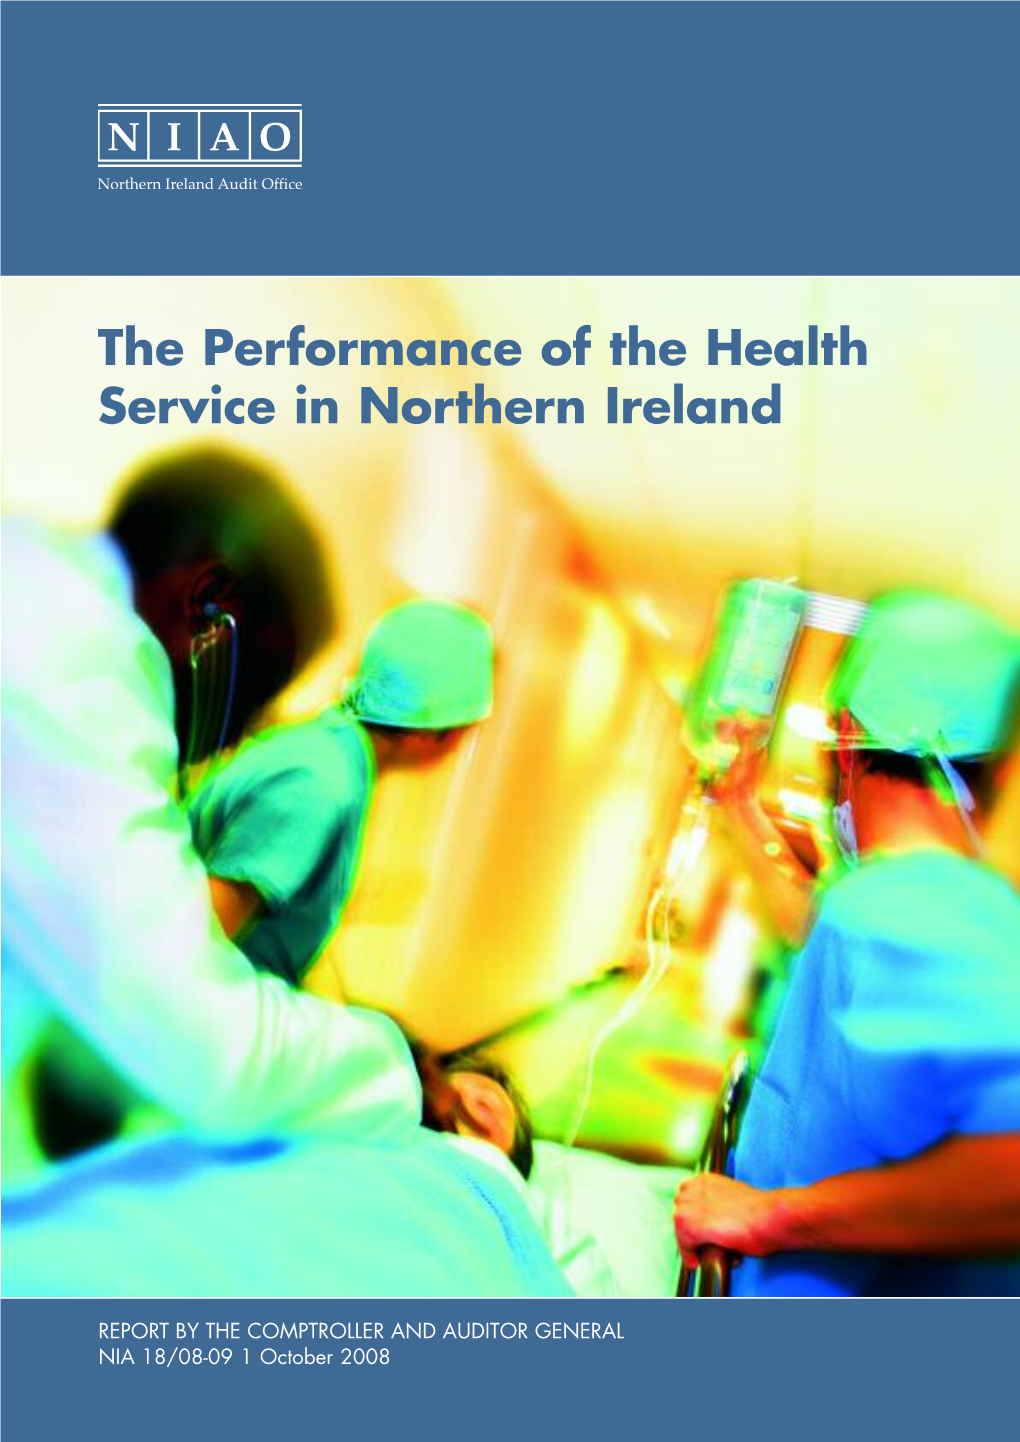 The Performance of the Health Service in Northern Ireland